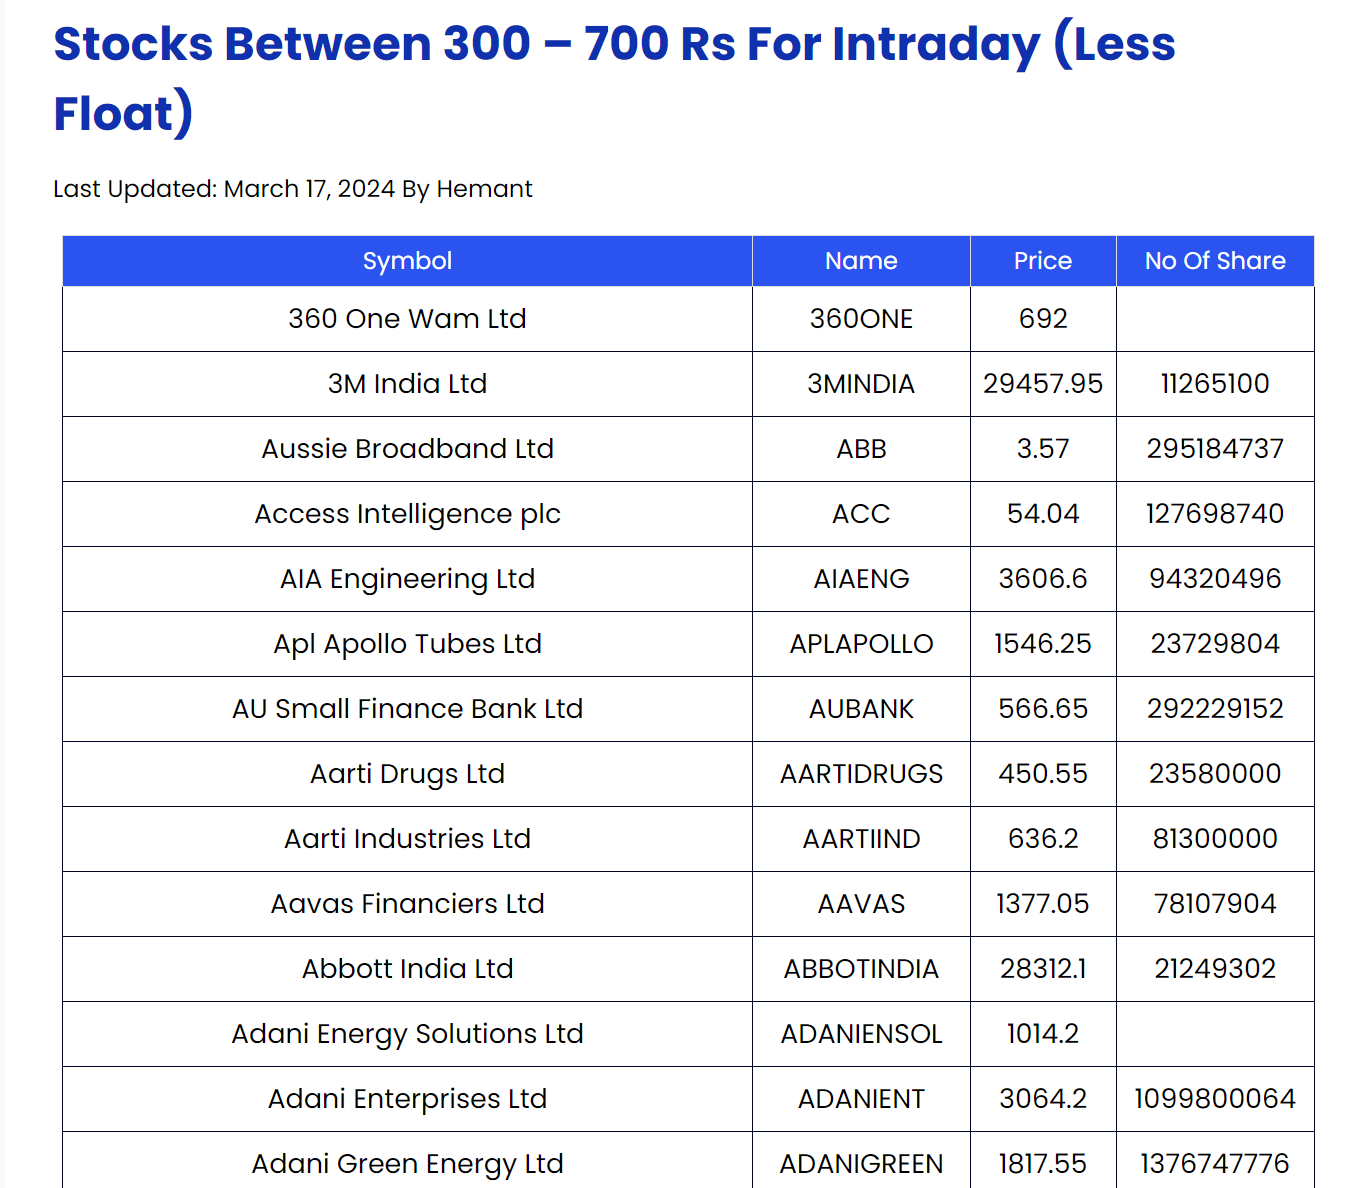 How To Find Stocks Between 300 - 700 Rs For Intraday Trading